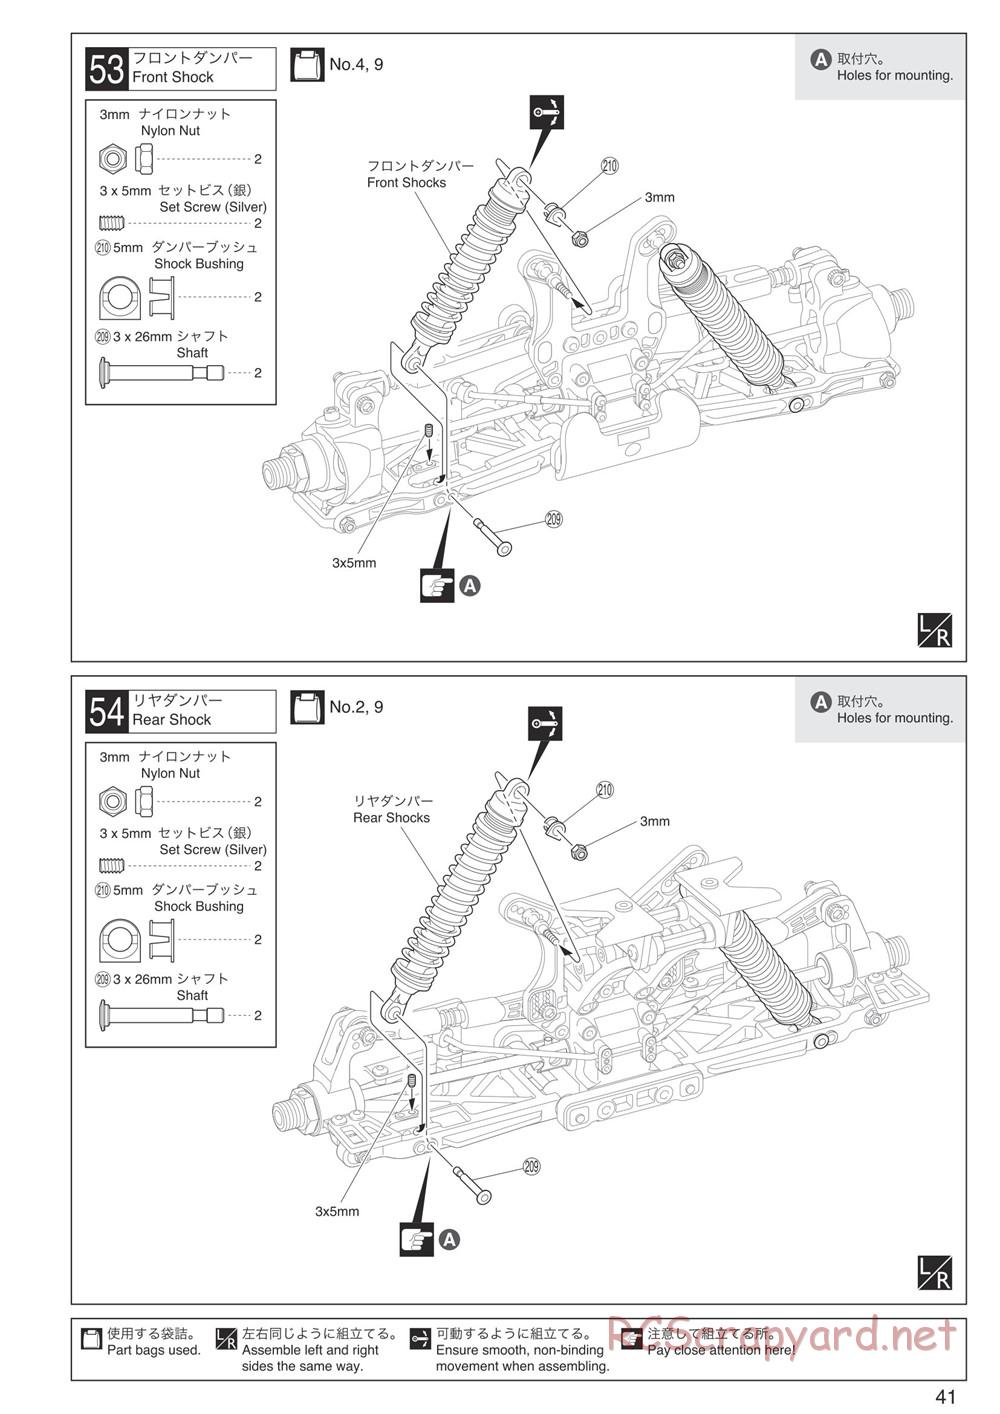 Kyosho - Inferno MP9 TKI4 10th Anniversary Special Edition - Manual - Page 41